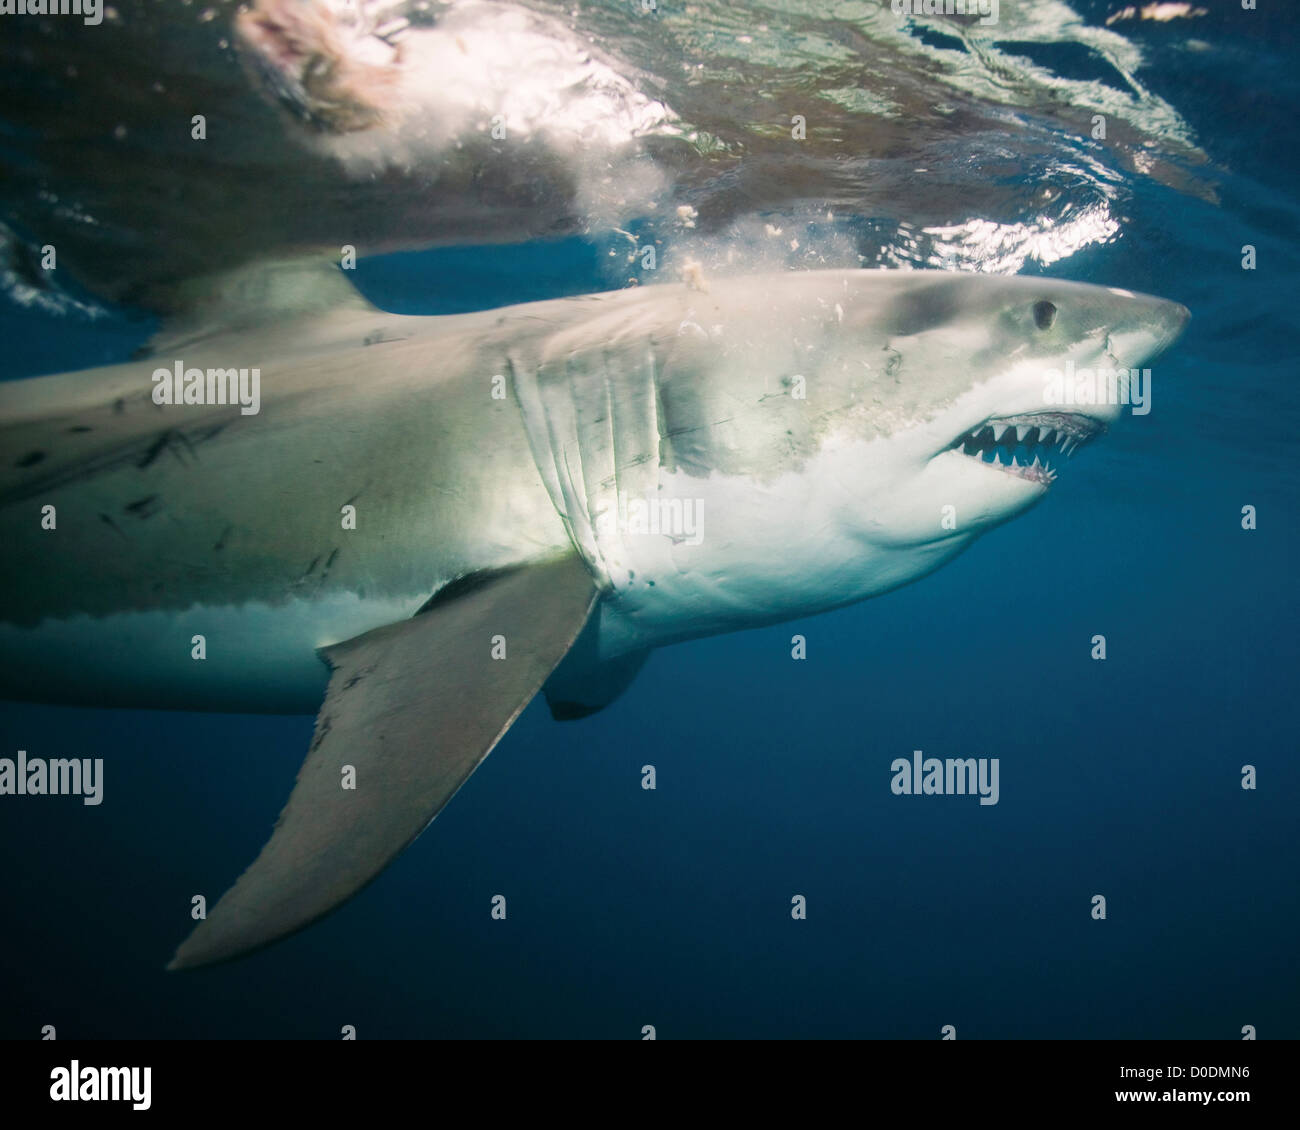 Powerful Charge of a Great White Shark Stock Photo - Alamy